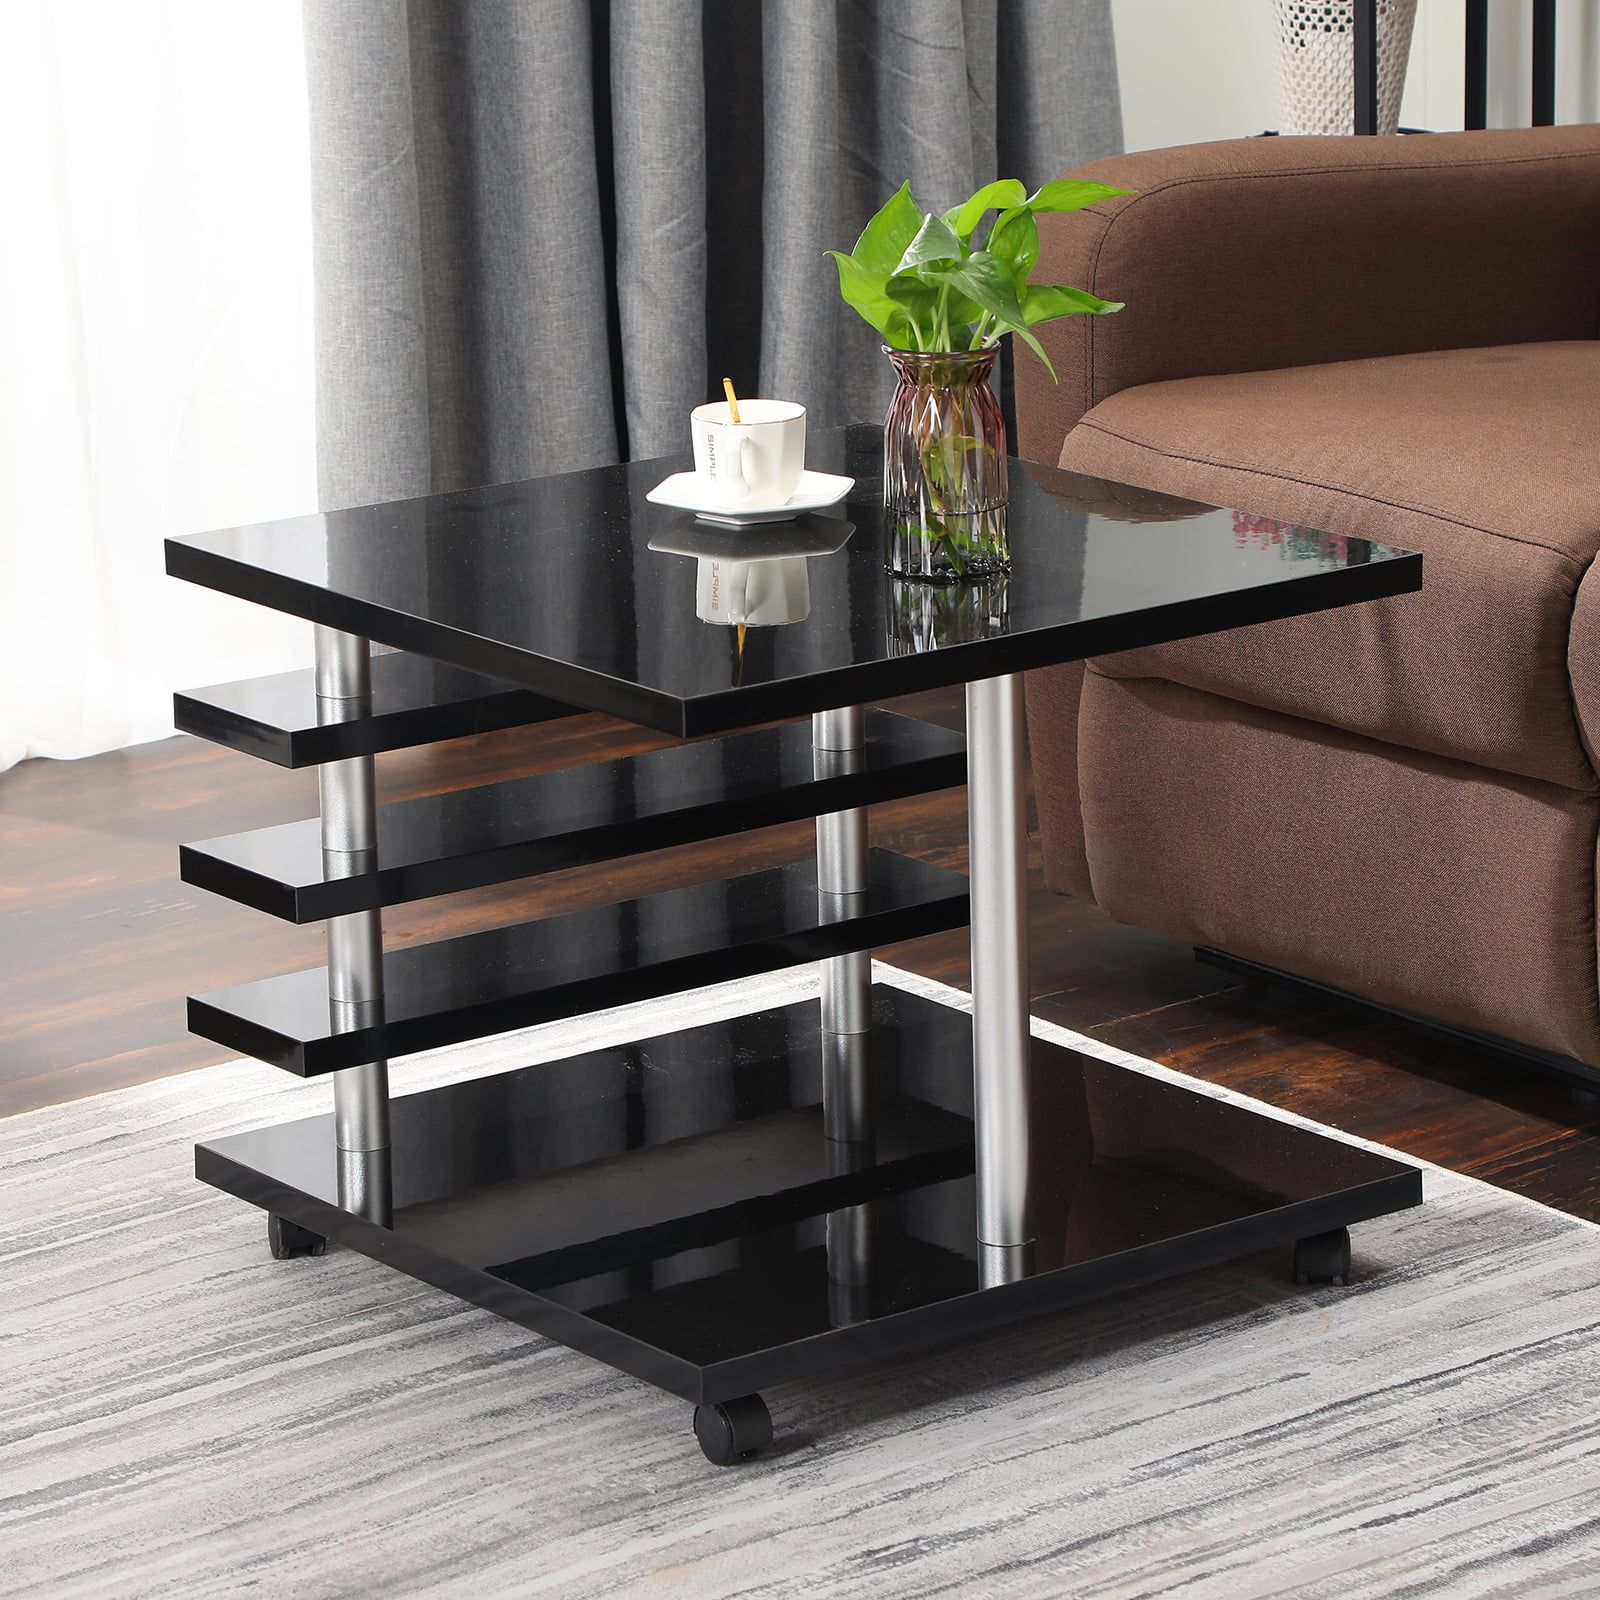 Hassch Modern Coffee Table With Led Lights Wood End Table With Wheels And  Storage Shelf For Home Bar Club, Black – Walmart Inside Hassch Modern Square Cocktail Tables (Photo 12 of 15)